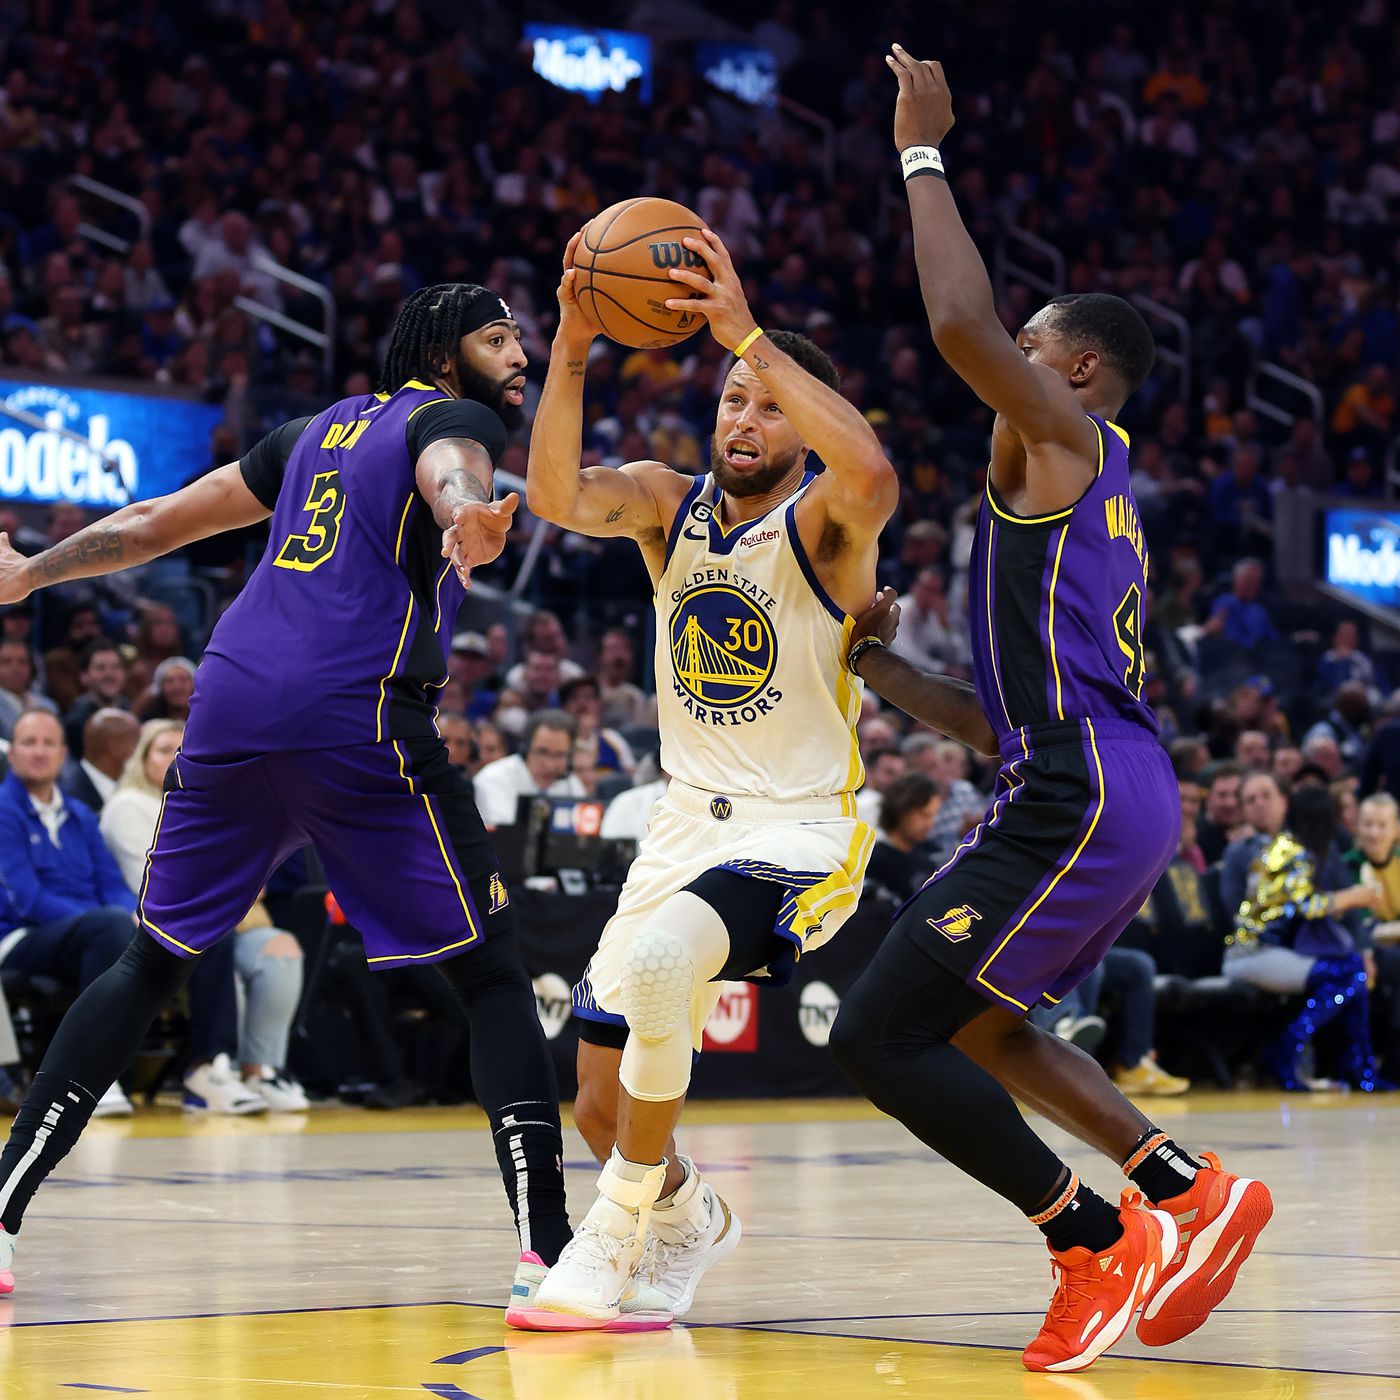 lakers warriors tickets 2022